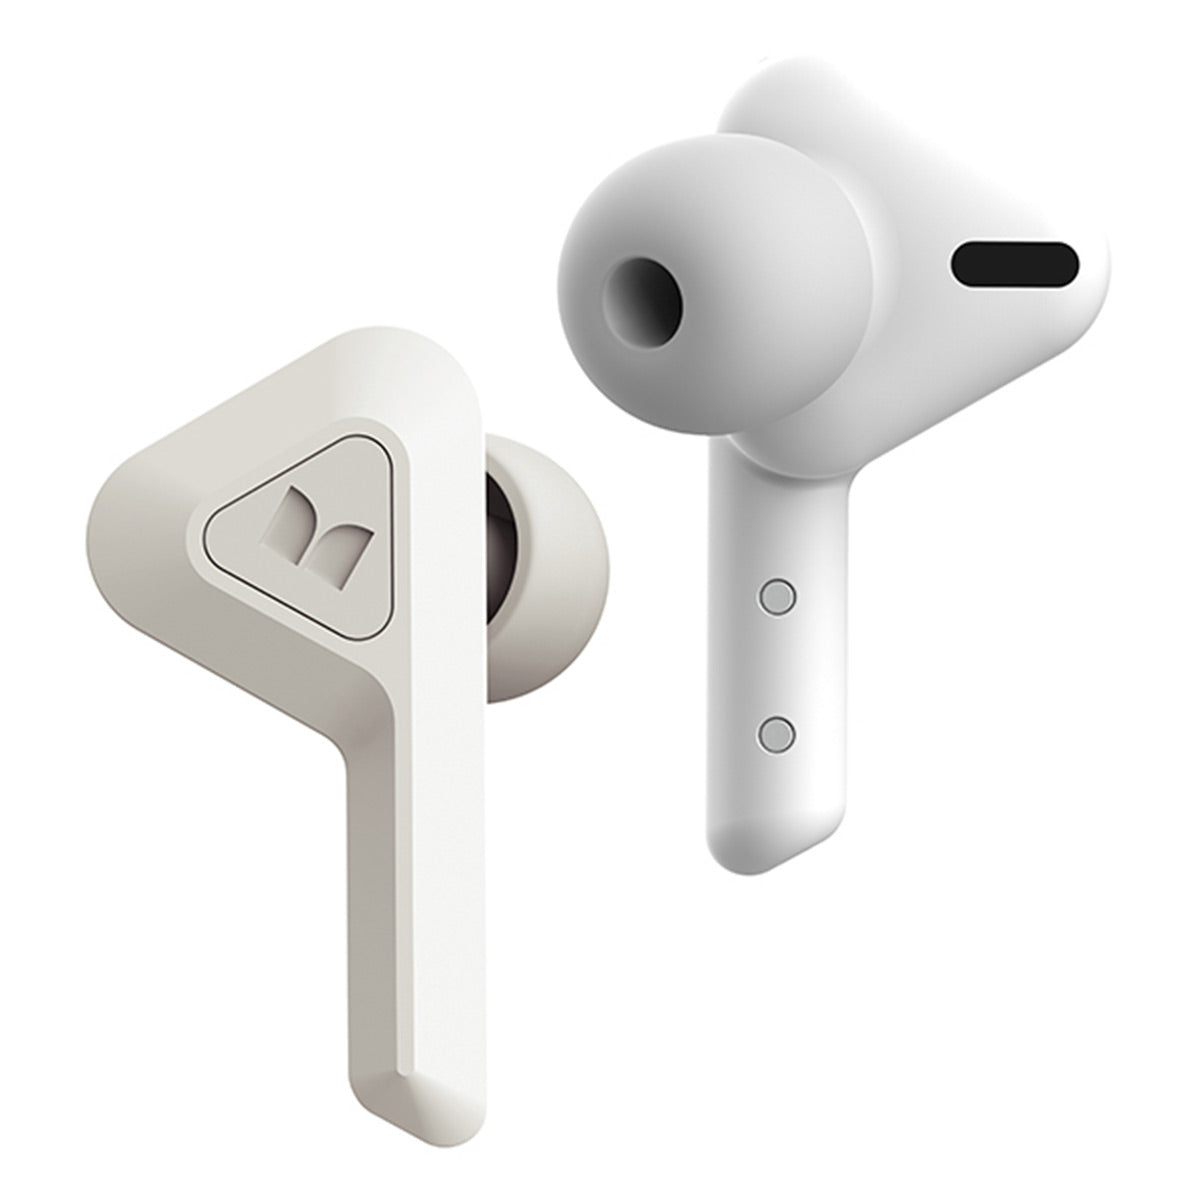 Monster DNA GO Bluetooth Earbuds with Ambient Noise Suppression, aptX Lossless Audio, & Qi Wireless Charging Case (White)